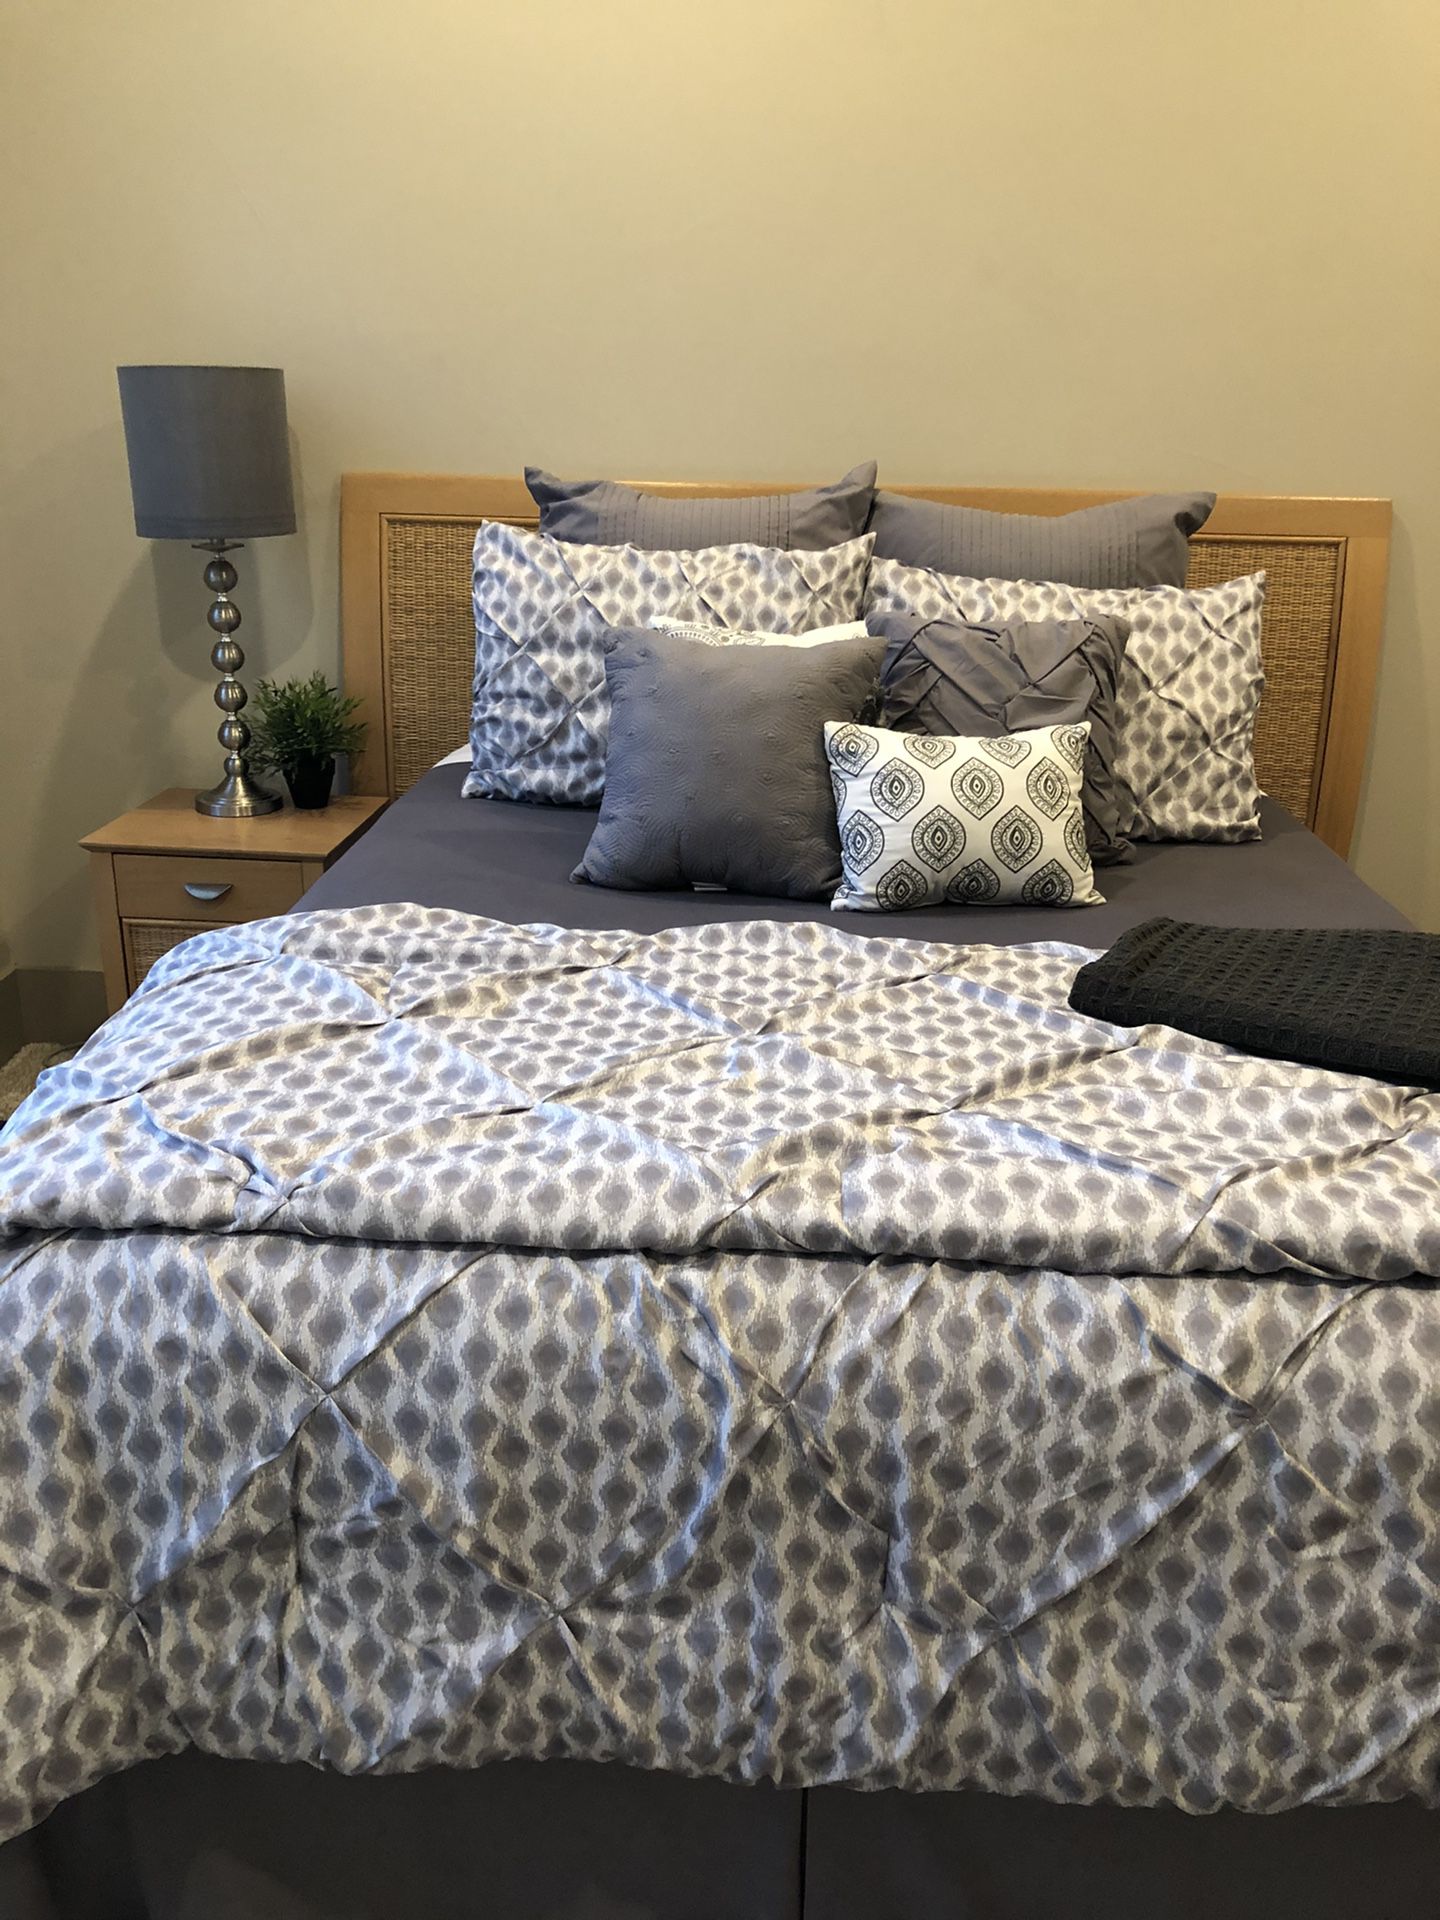 King headboard with 2 matching night stands. And matching Armoire for a TV or clothes/storage.Armoire has been used both ways. Armoire dimensions are